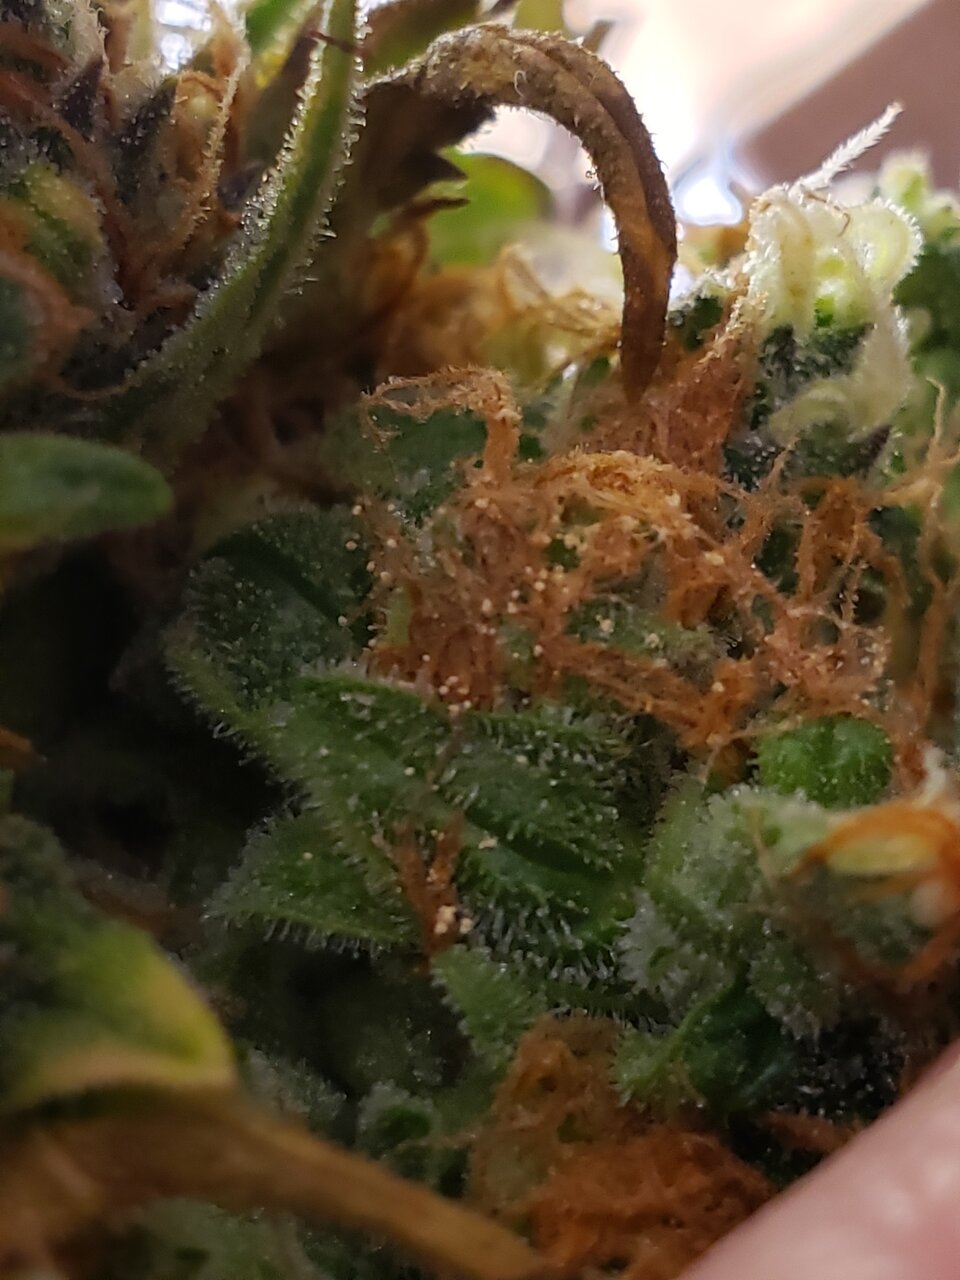 Zkittles auto found shit on my buds maybe bud rot